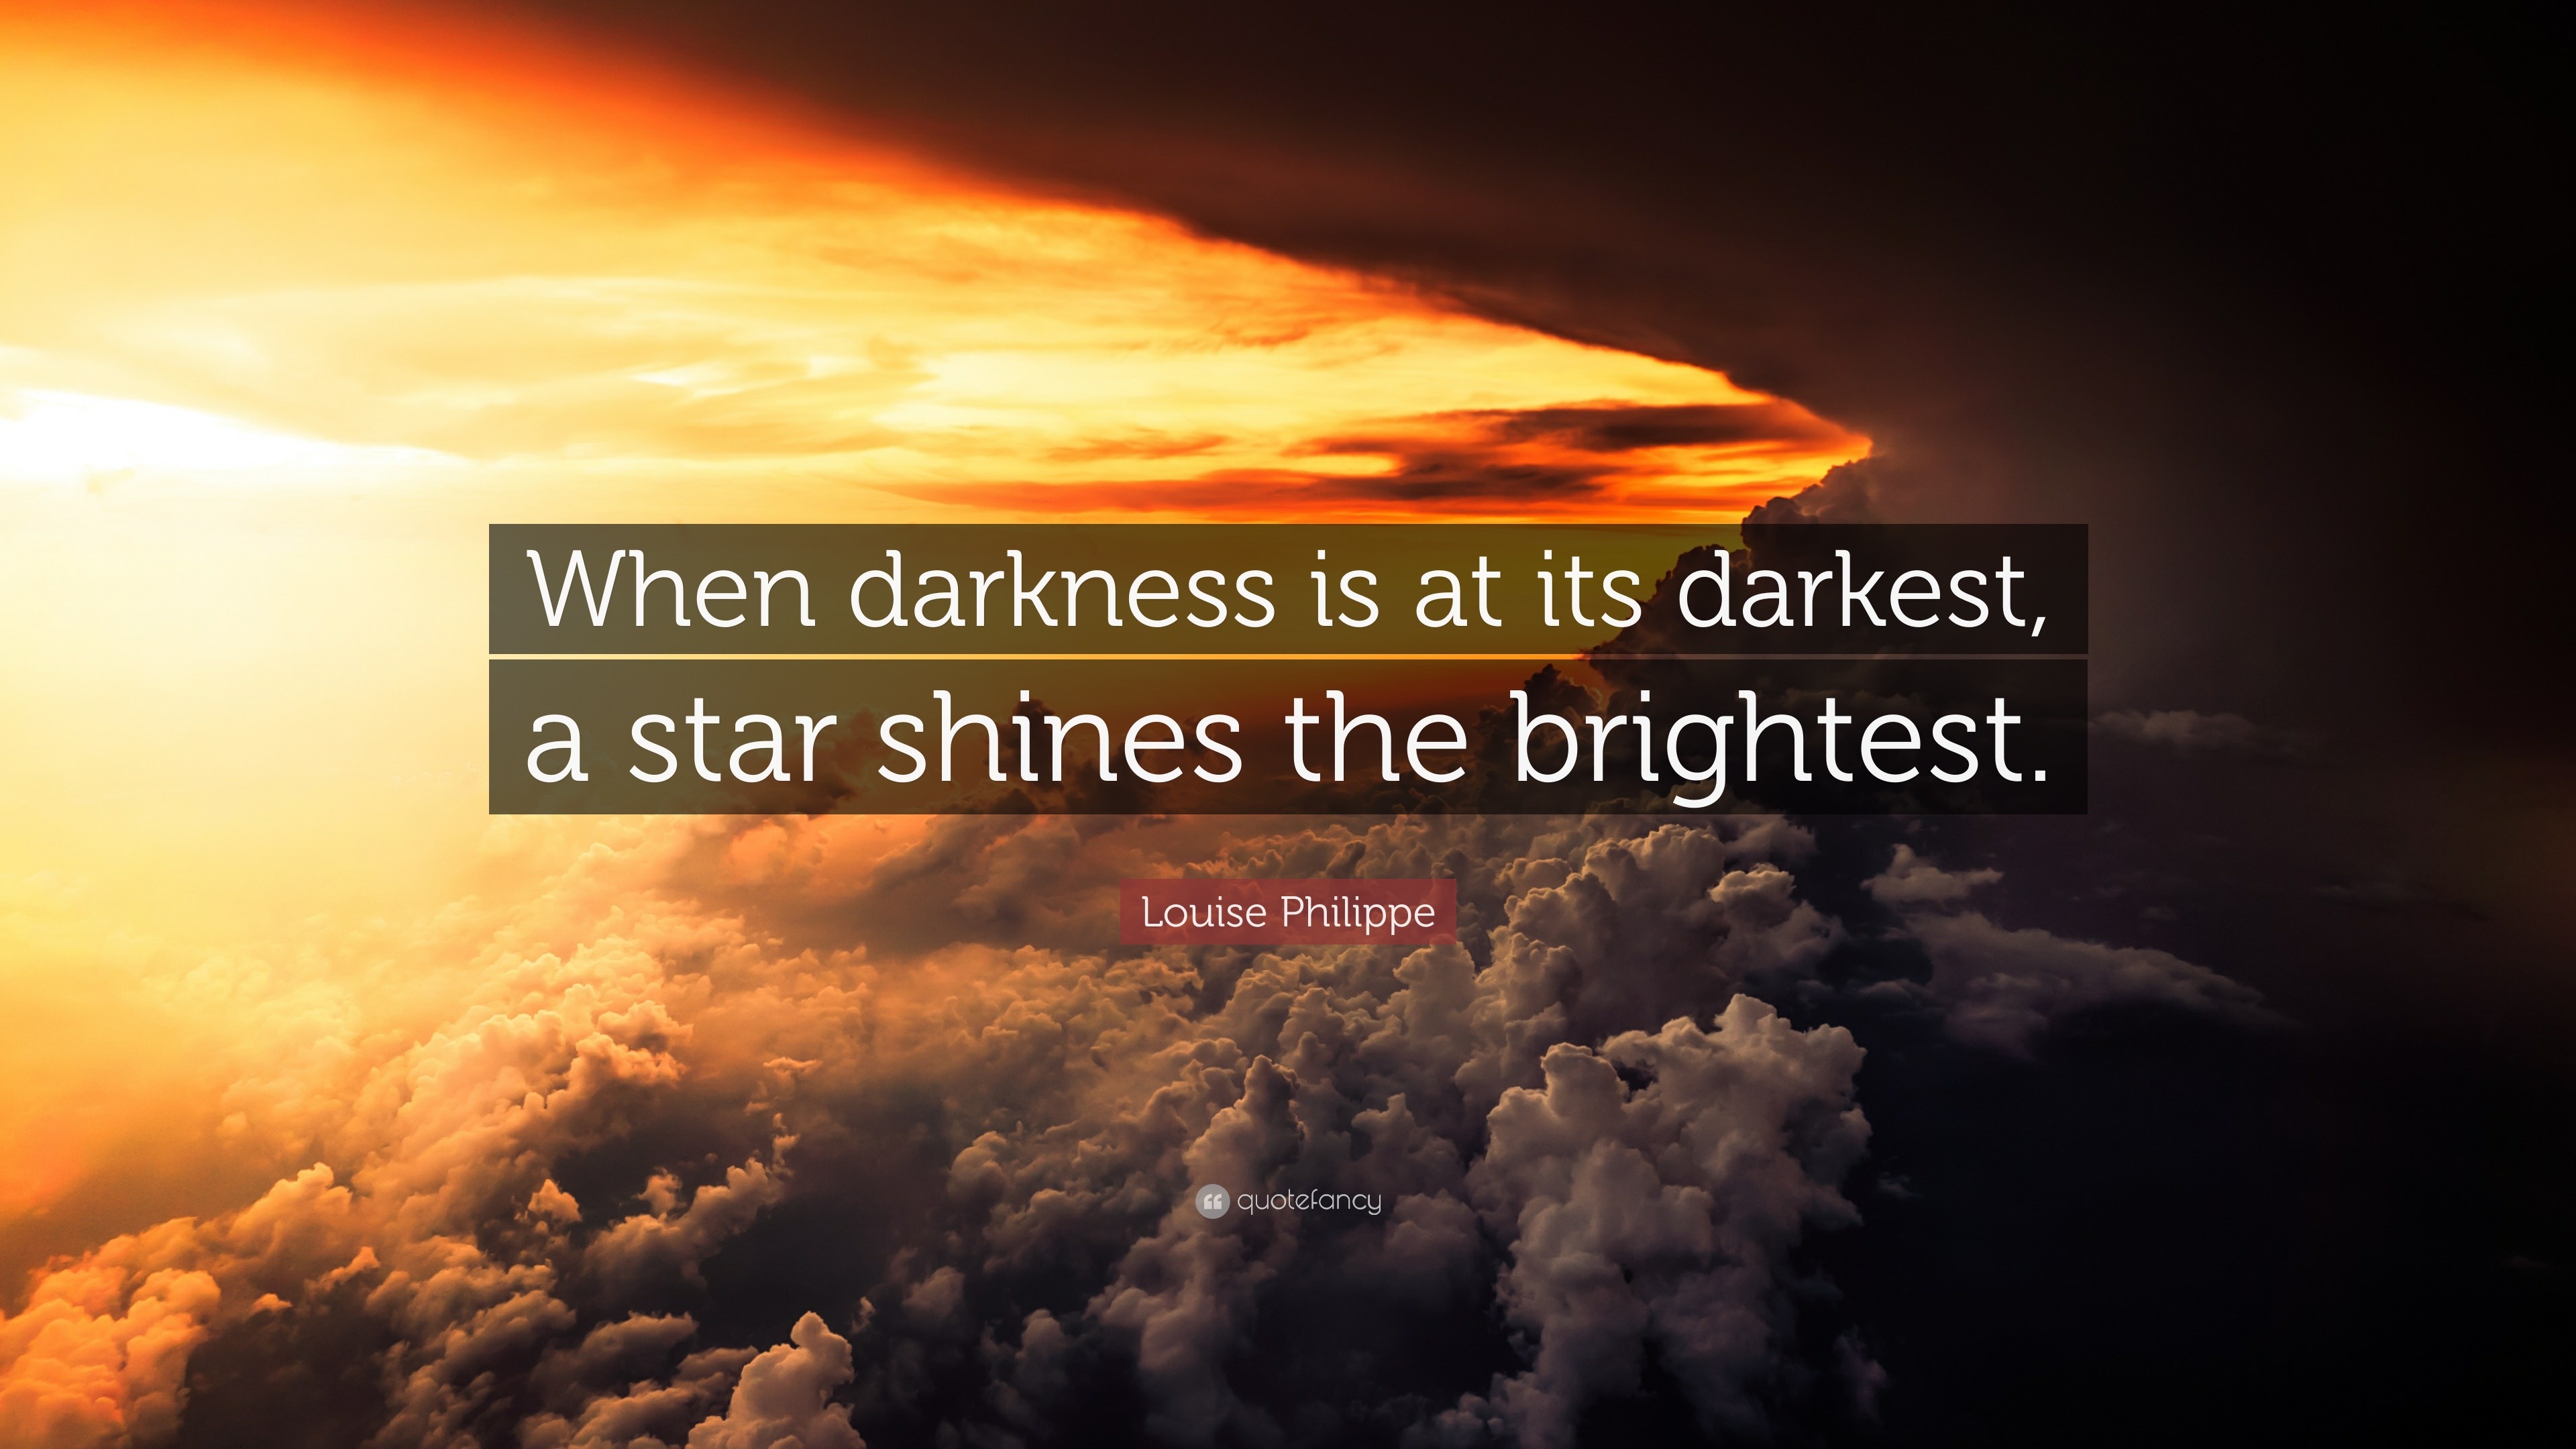 Louise Philippe Quote: “When darkness is at its darkest, a star shines ...